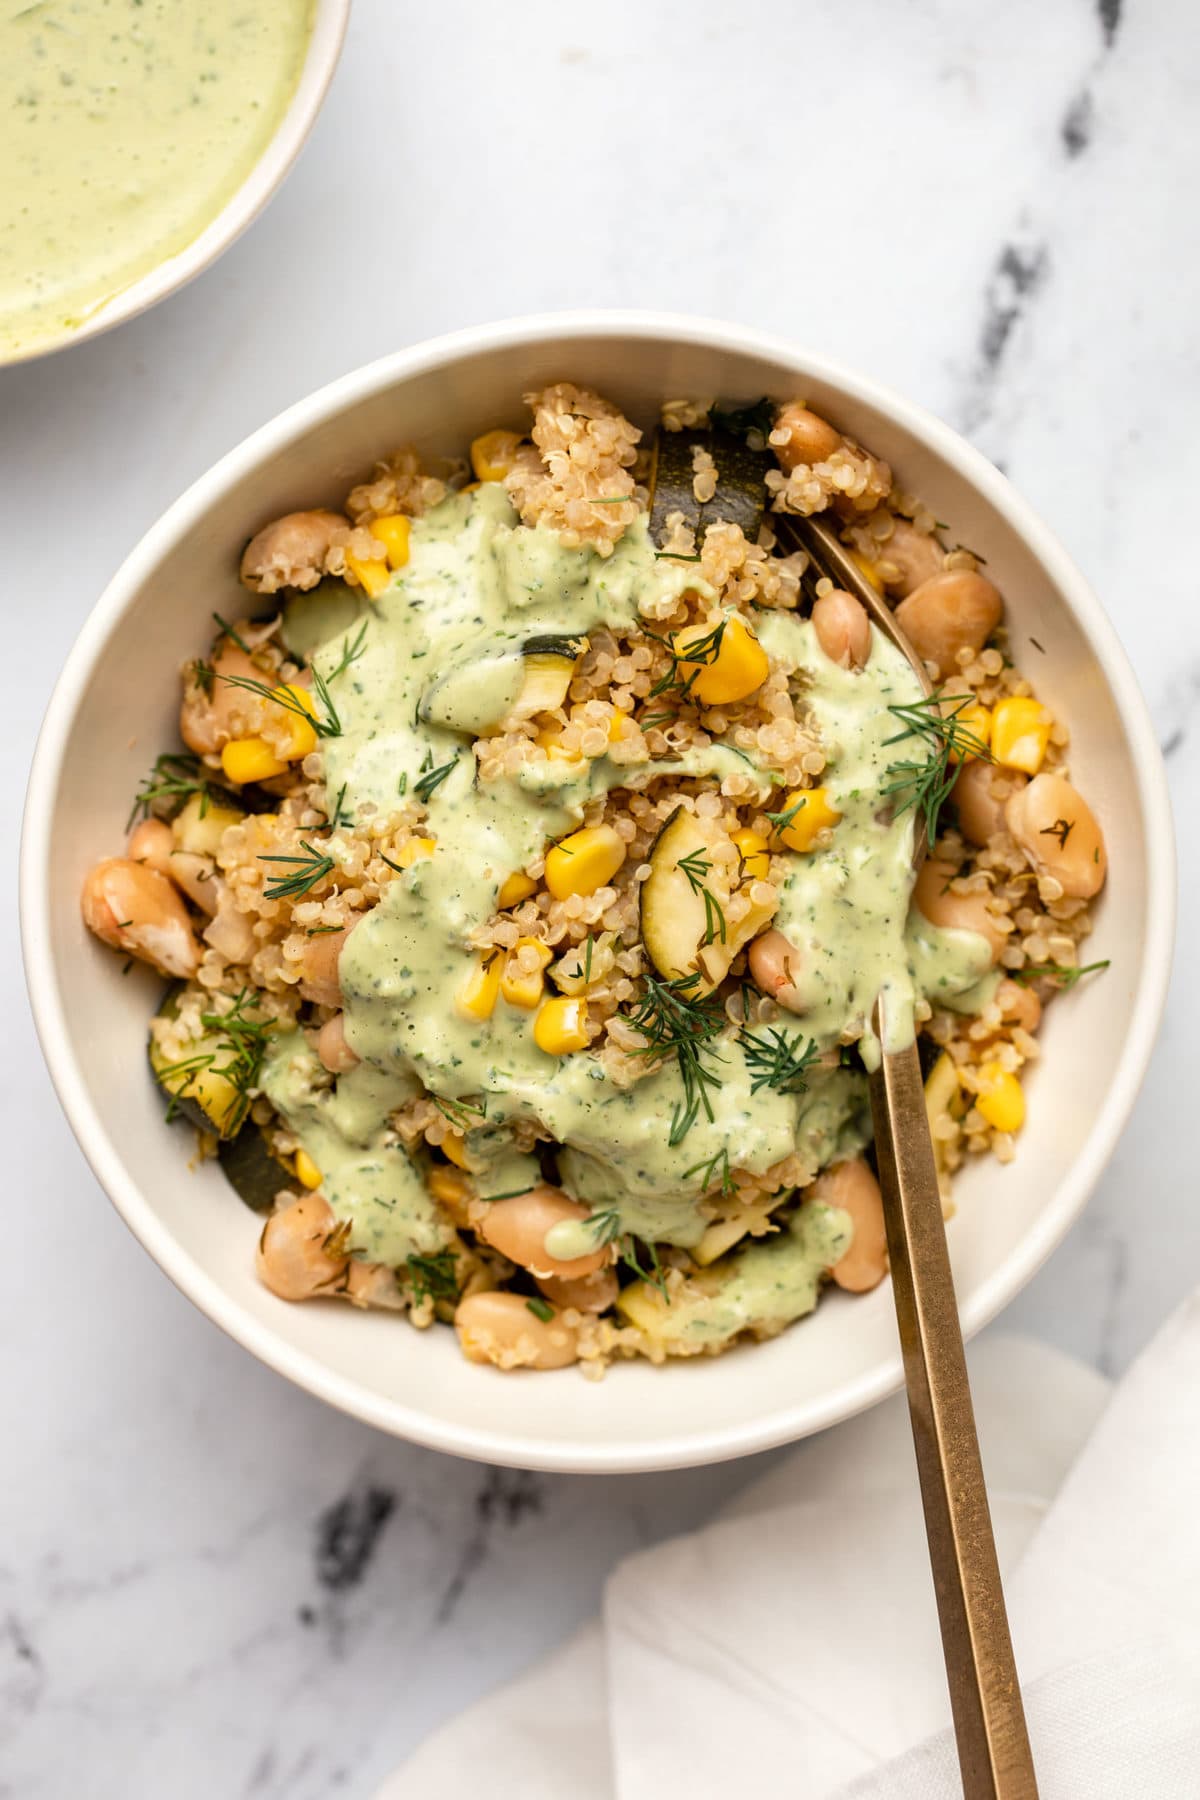 lemon dill quinoa casserole in white bowl topped with green goddess tahini dressing and a gold fork